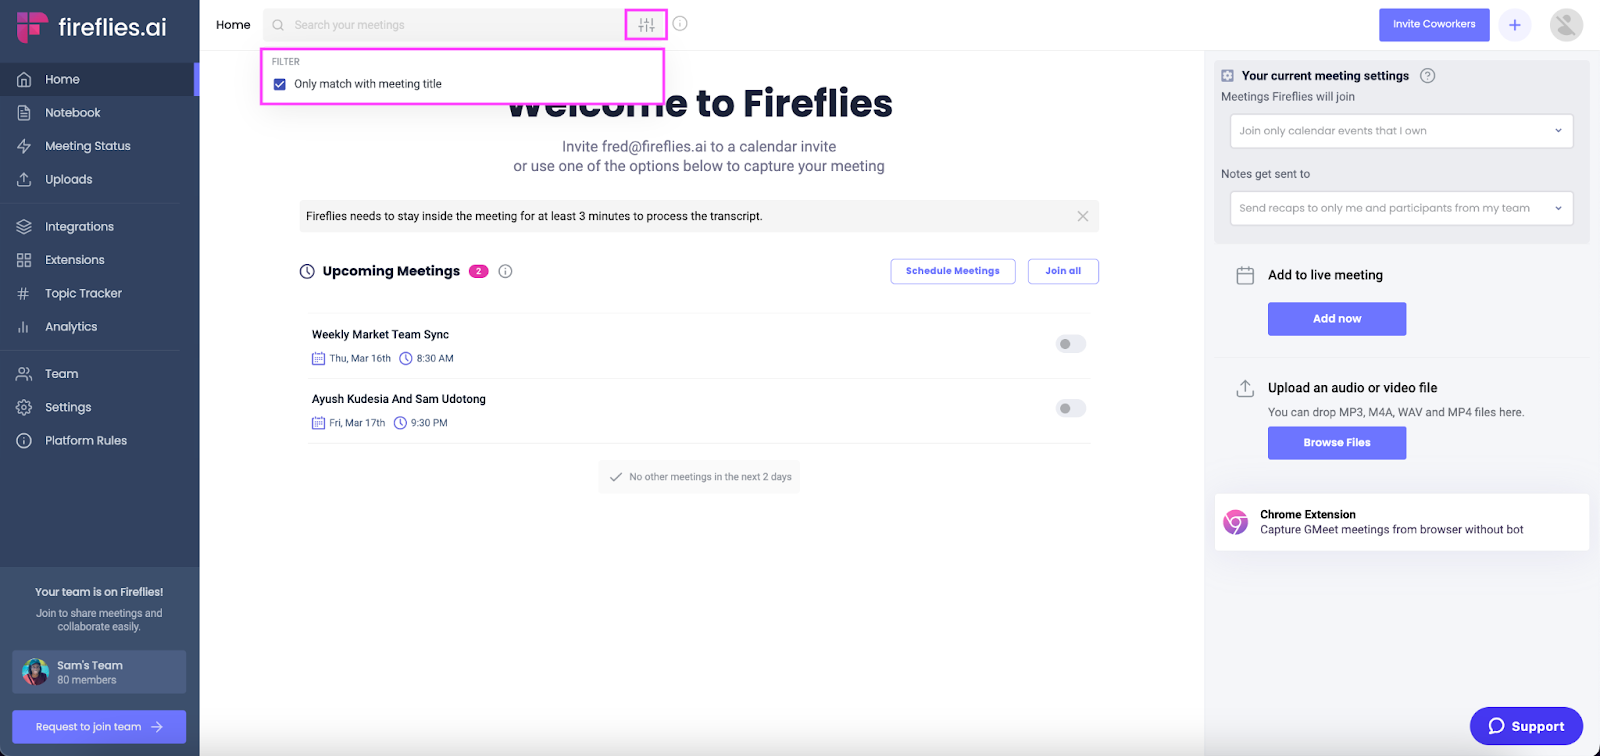 How to view your Google Meet history - Fireflies global search settings